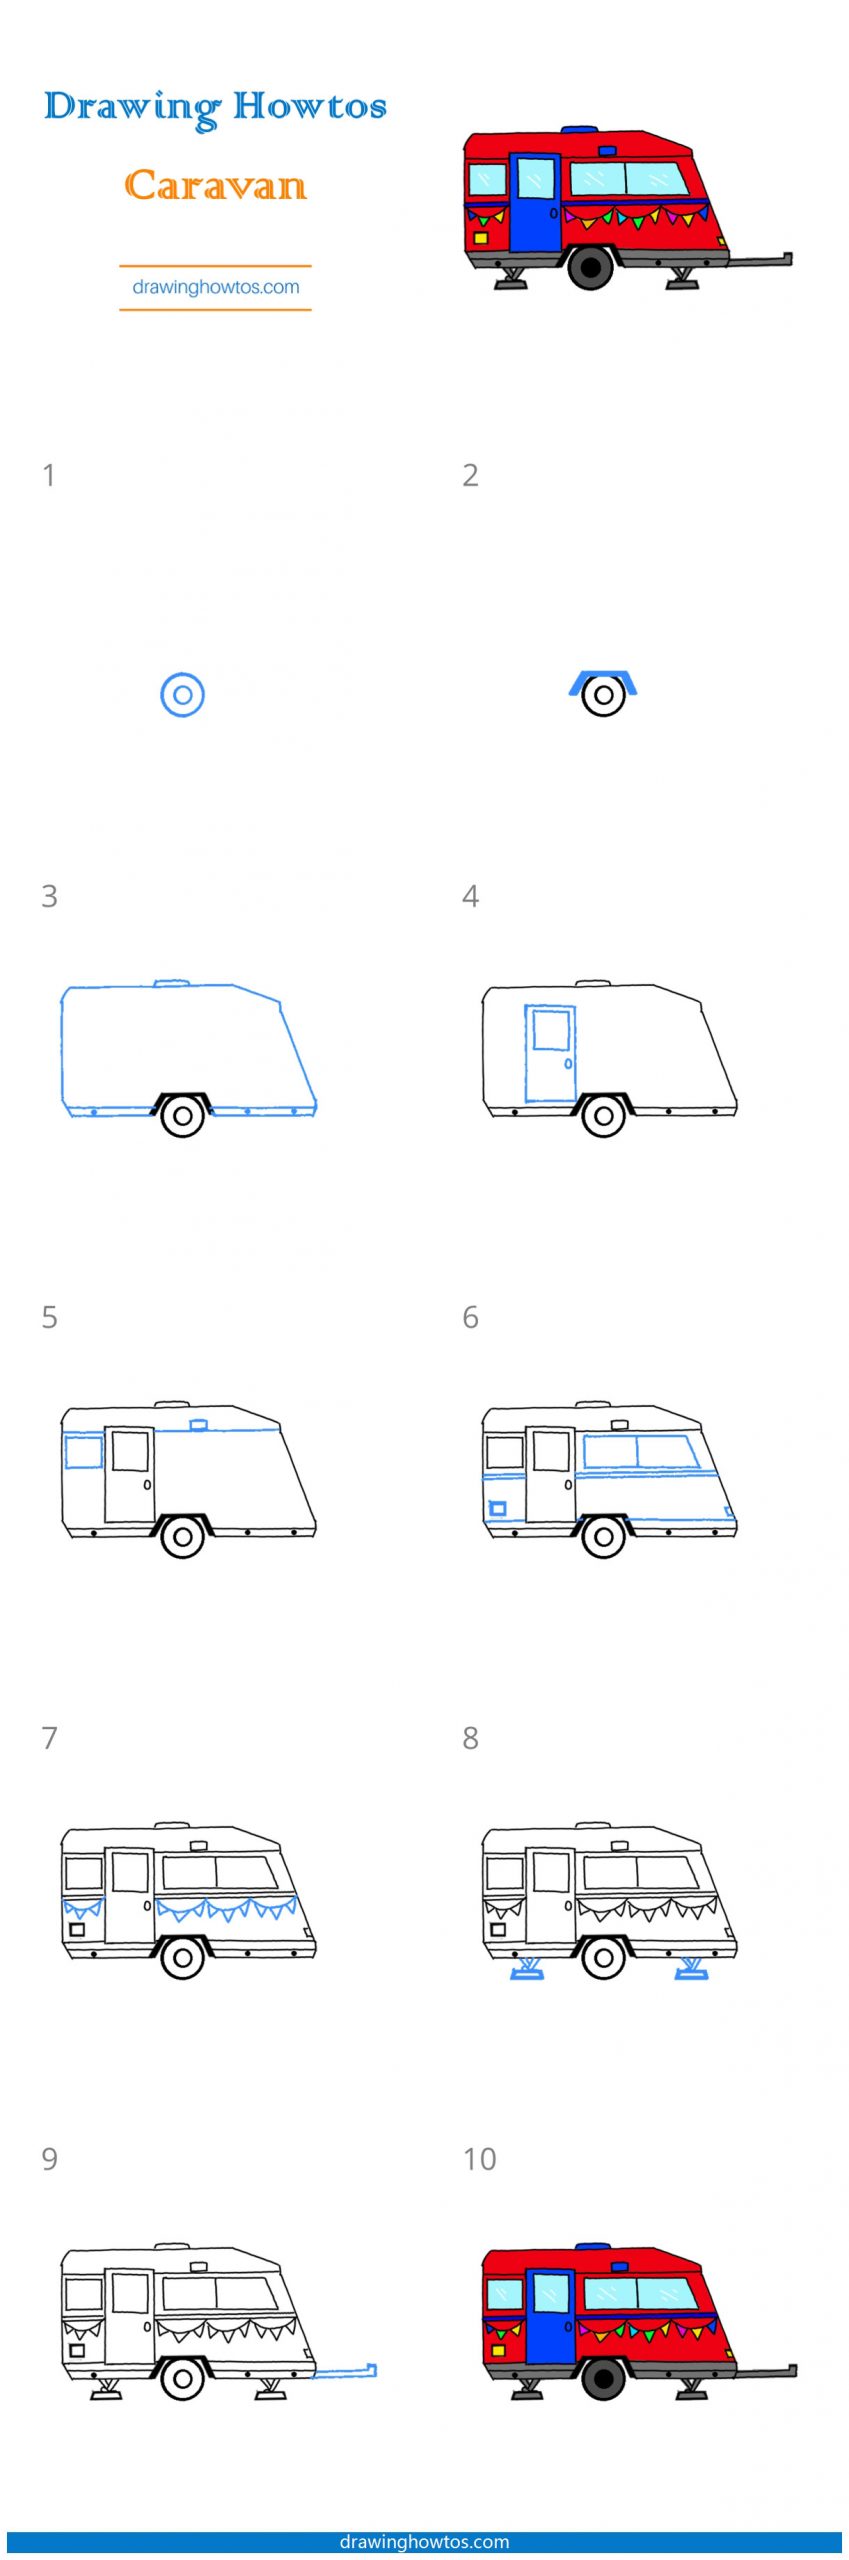 How to Draw a Caravan Step by Step